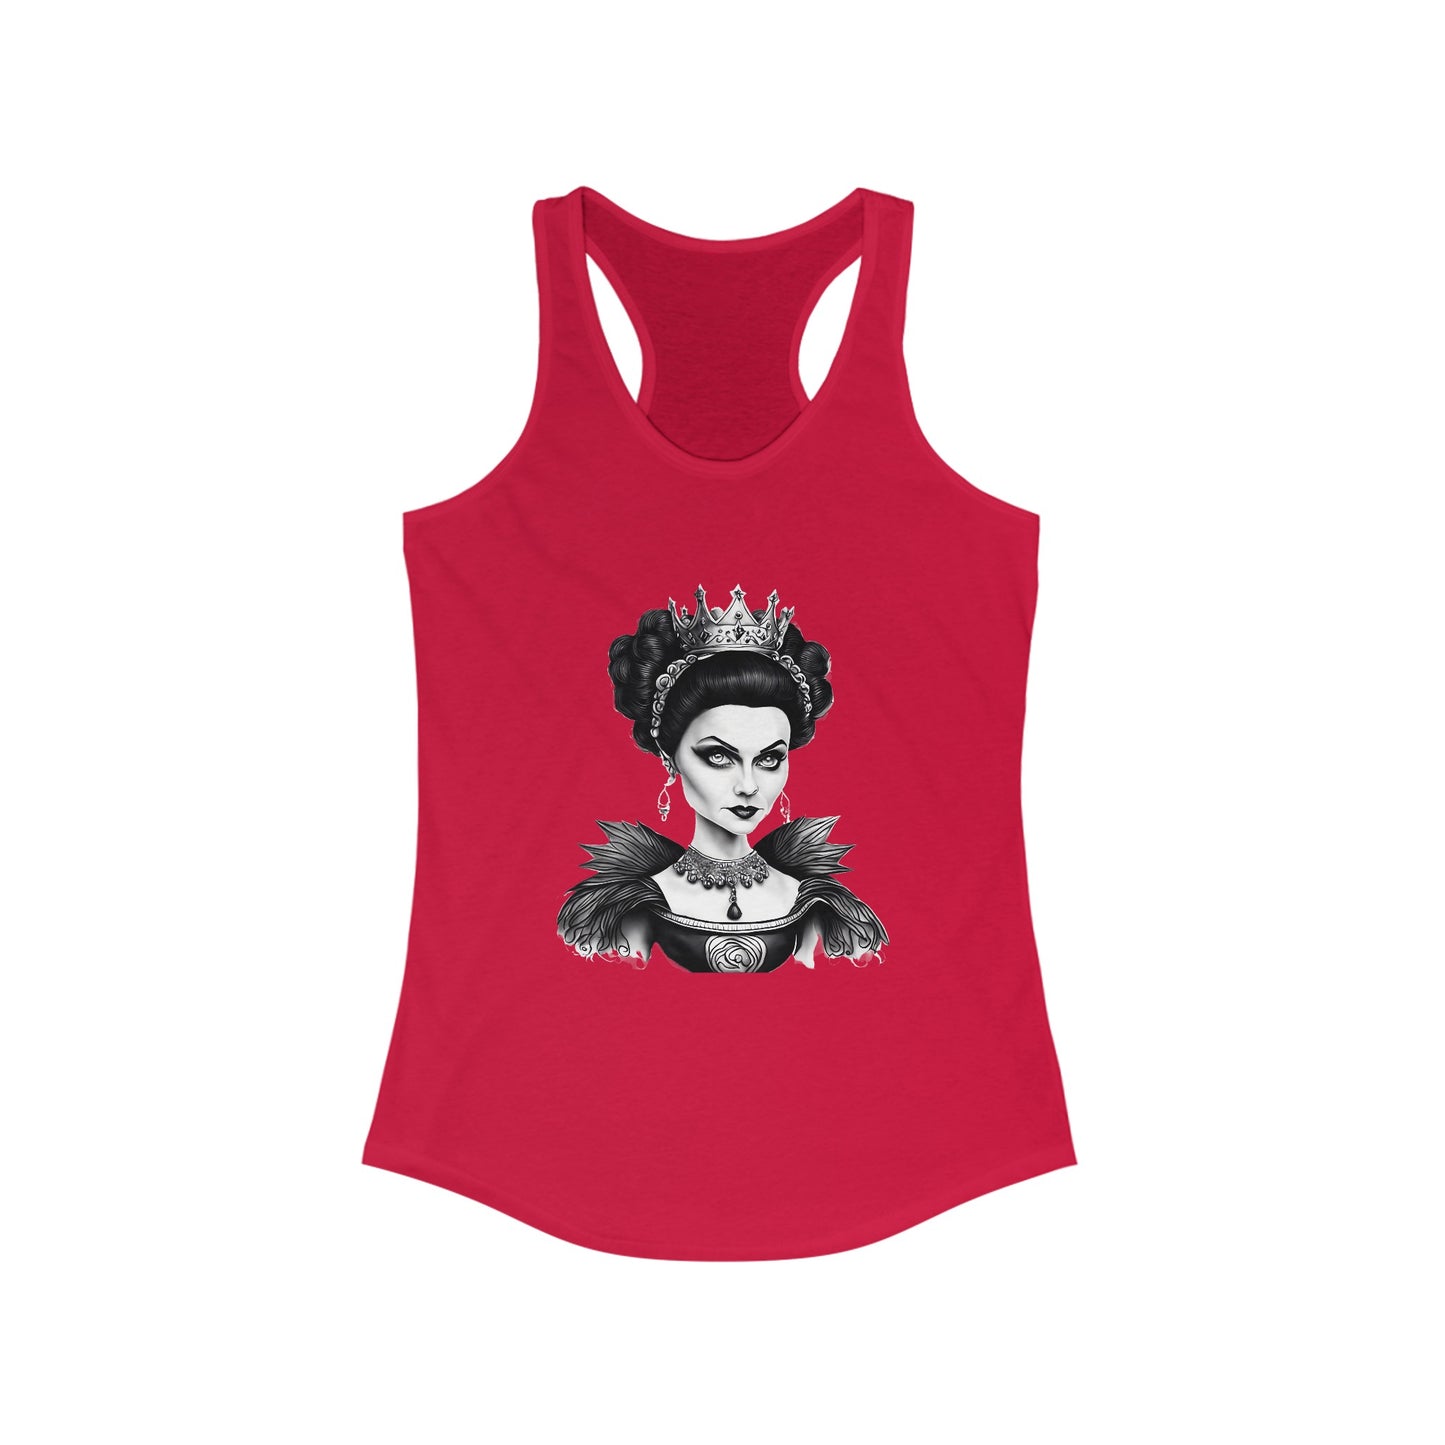 The Stamina for Men Women's Queen of Spades Swingers red Tank Top | QOS front view